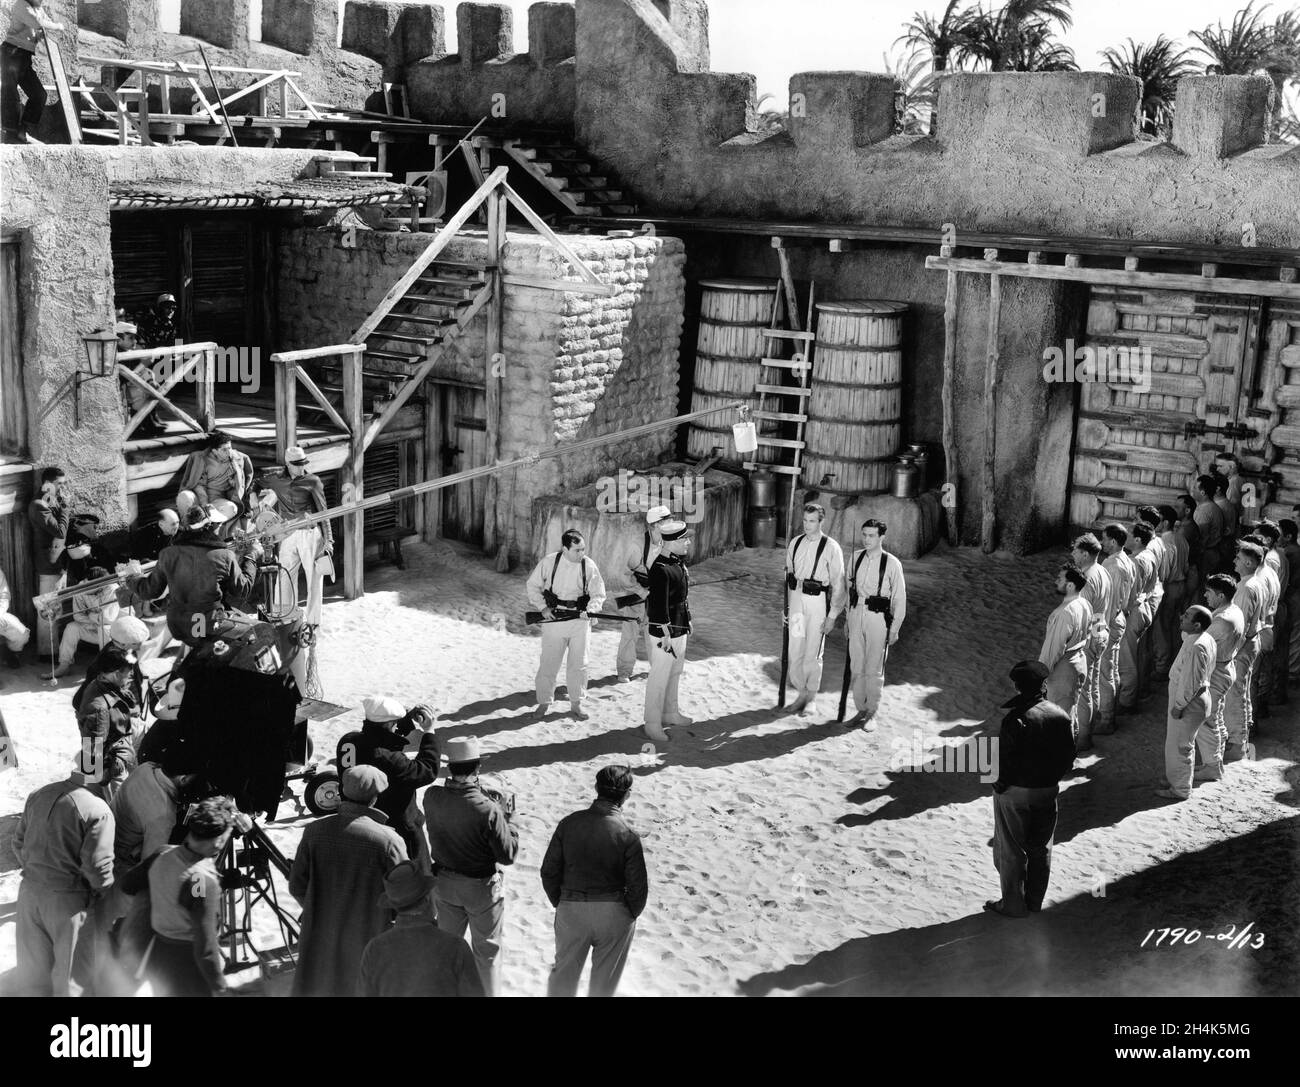 HAROLD HUBER J. CARROL NAISH BRIAN DONLEVY GARY COOPER and RAY MILLAND on set candid with Camera / Movie Crew during filming of BEAU GESTE 1939 director WILLIAM A. WELLMAN novel P.C. Wren art direction Hans Dreier and Robert Odell music Alfred Newman costumes Edith Head Paramount Pictures Stock Photo